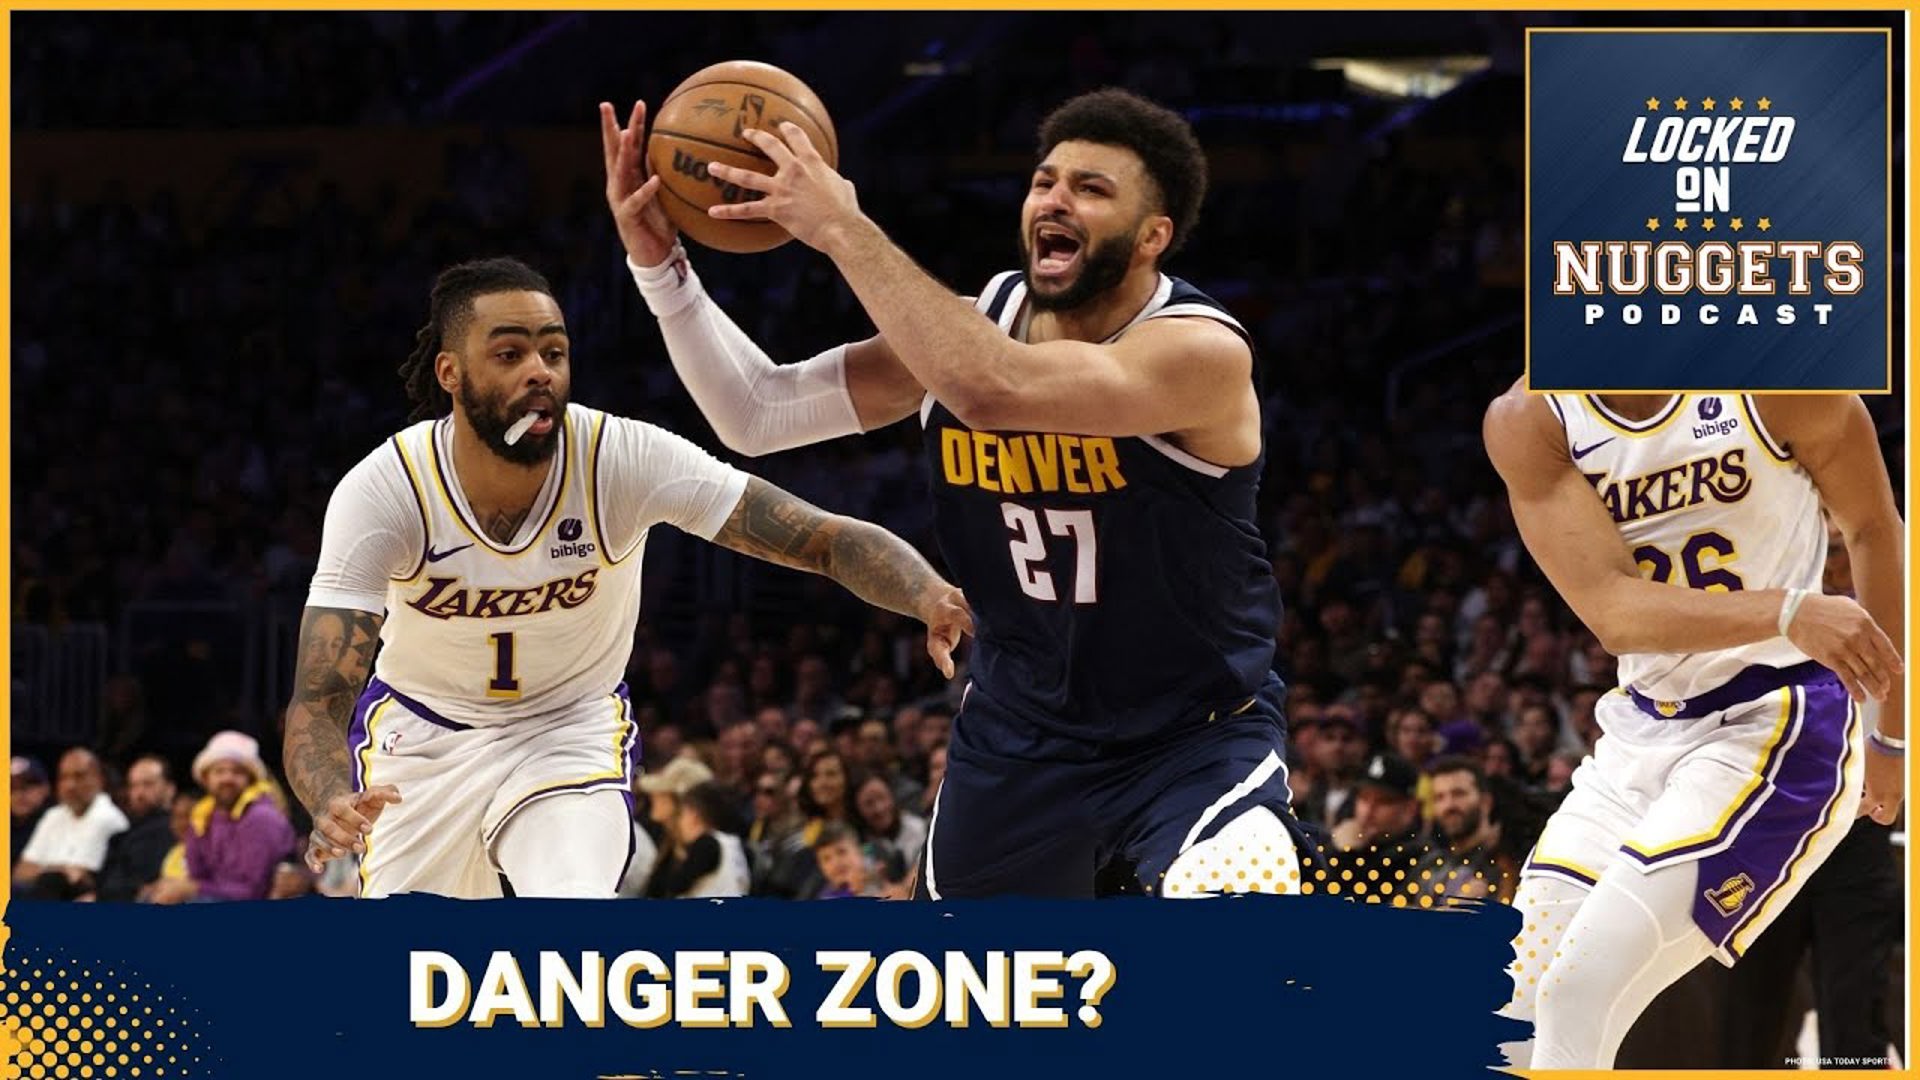 The Nuggets lose Game 5. Jamal Murray is questionable. Jokic's defense has been bad. Are... are the Nuggets in trouble?